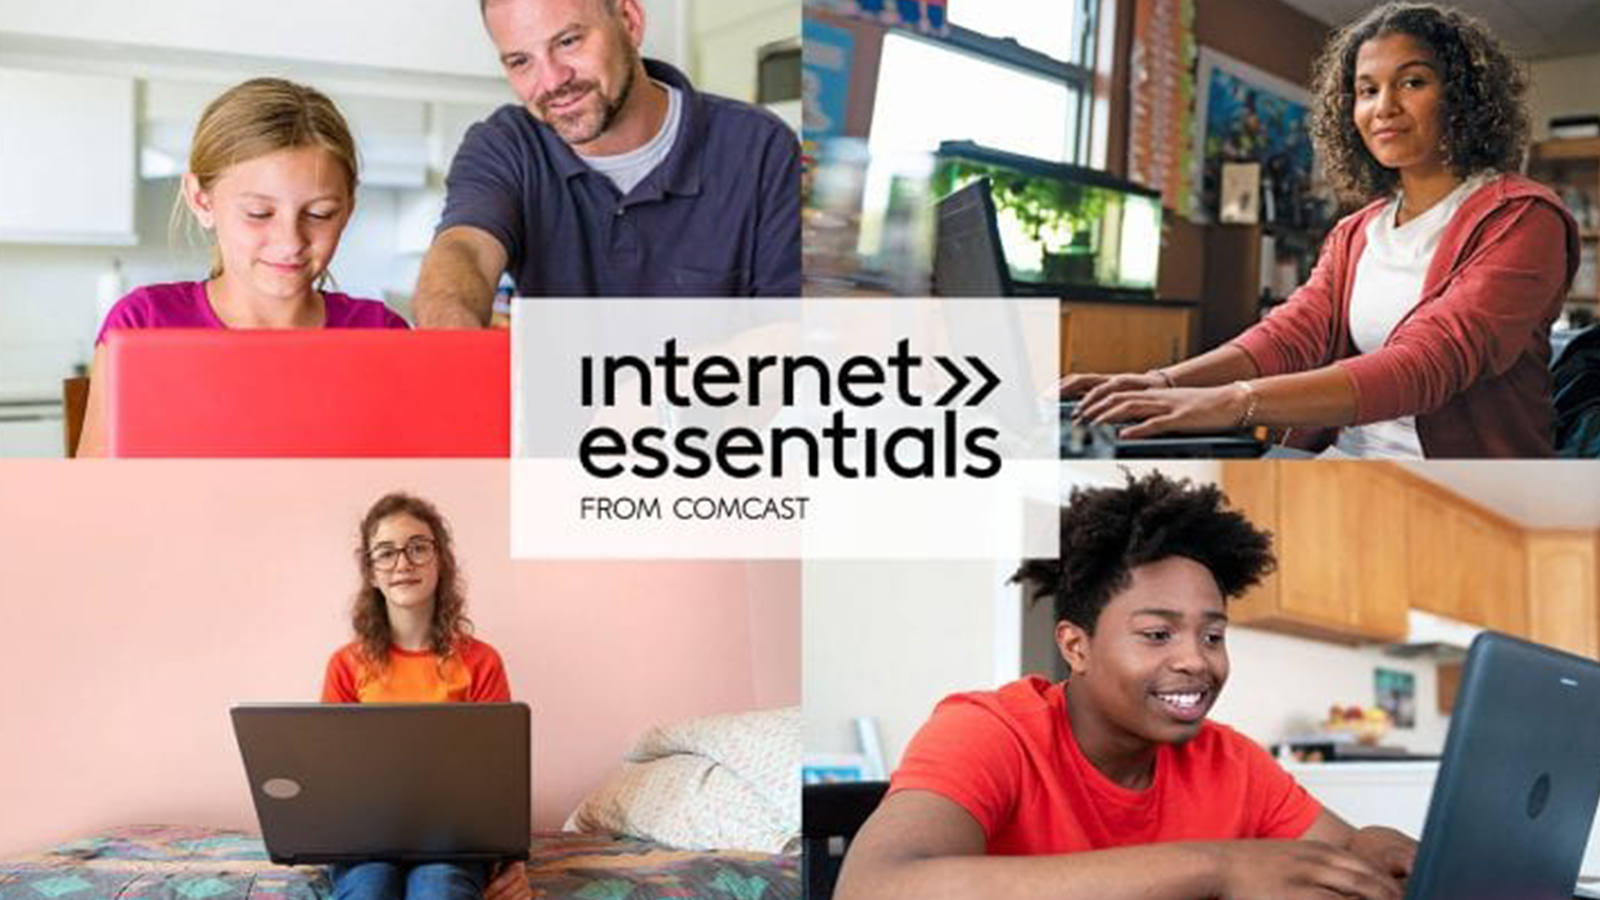 Internet Essentials From Comcast picture collage.